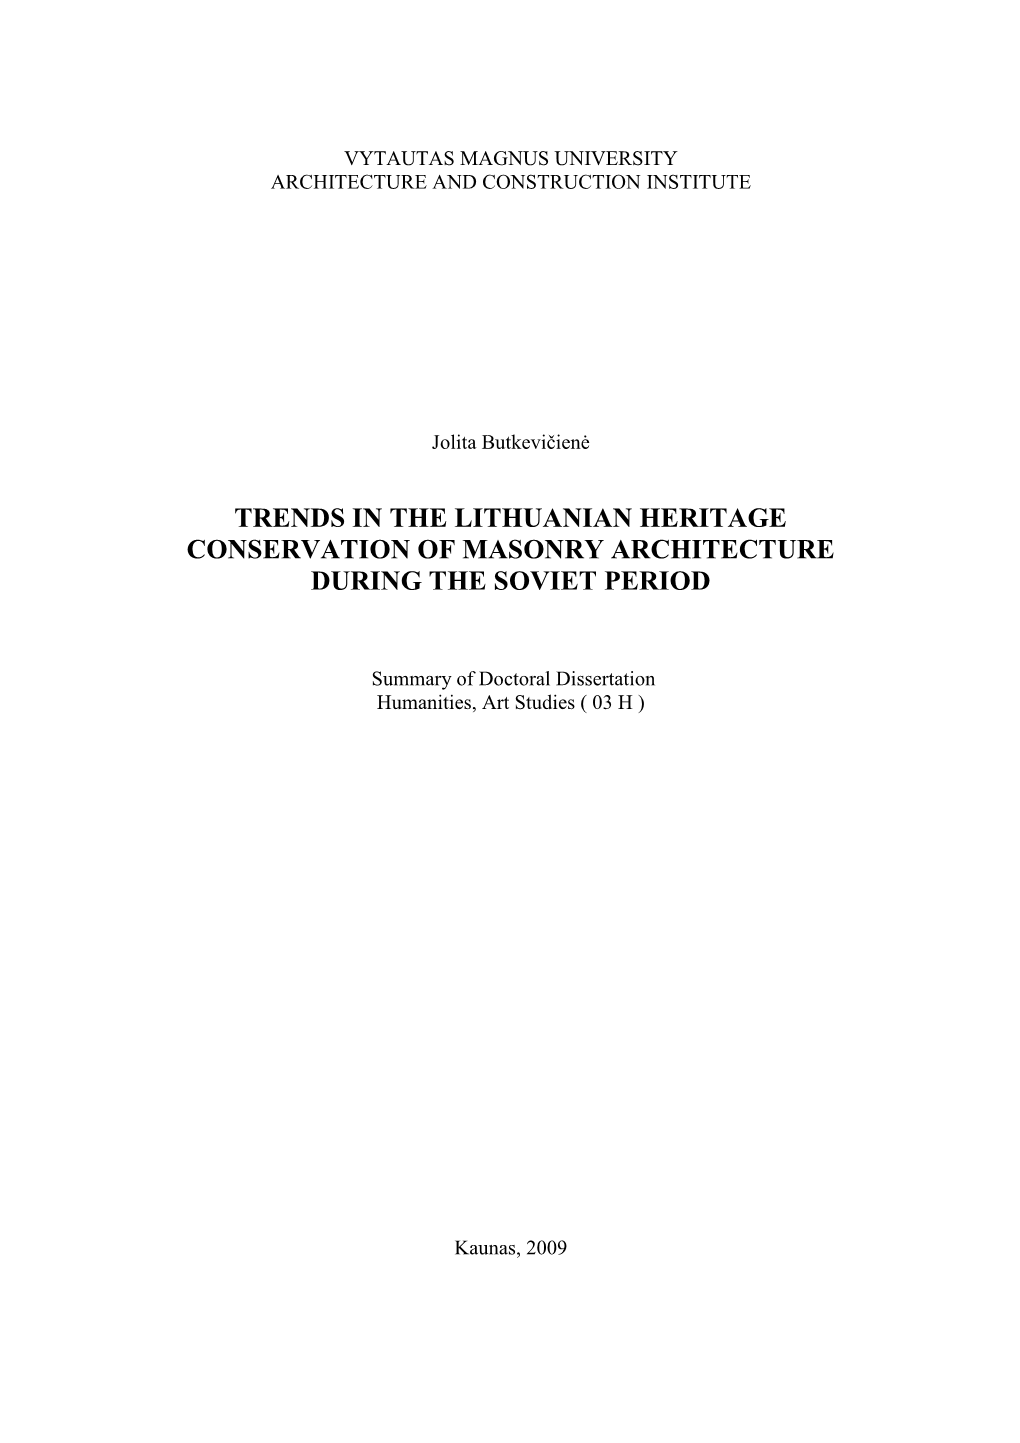 Trends in the Lithuanian Heritage Conservation of Masonry Architecture During the Soviet Period